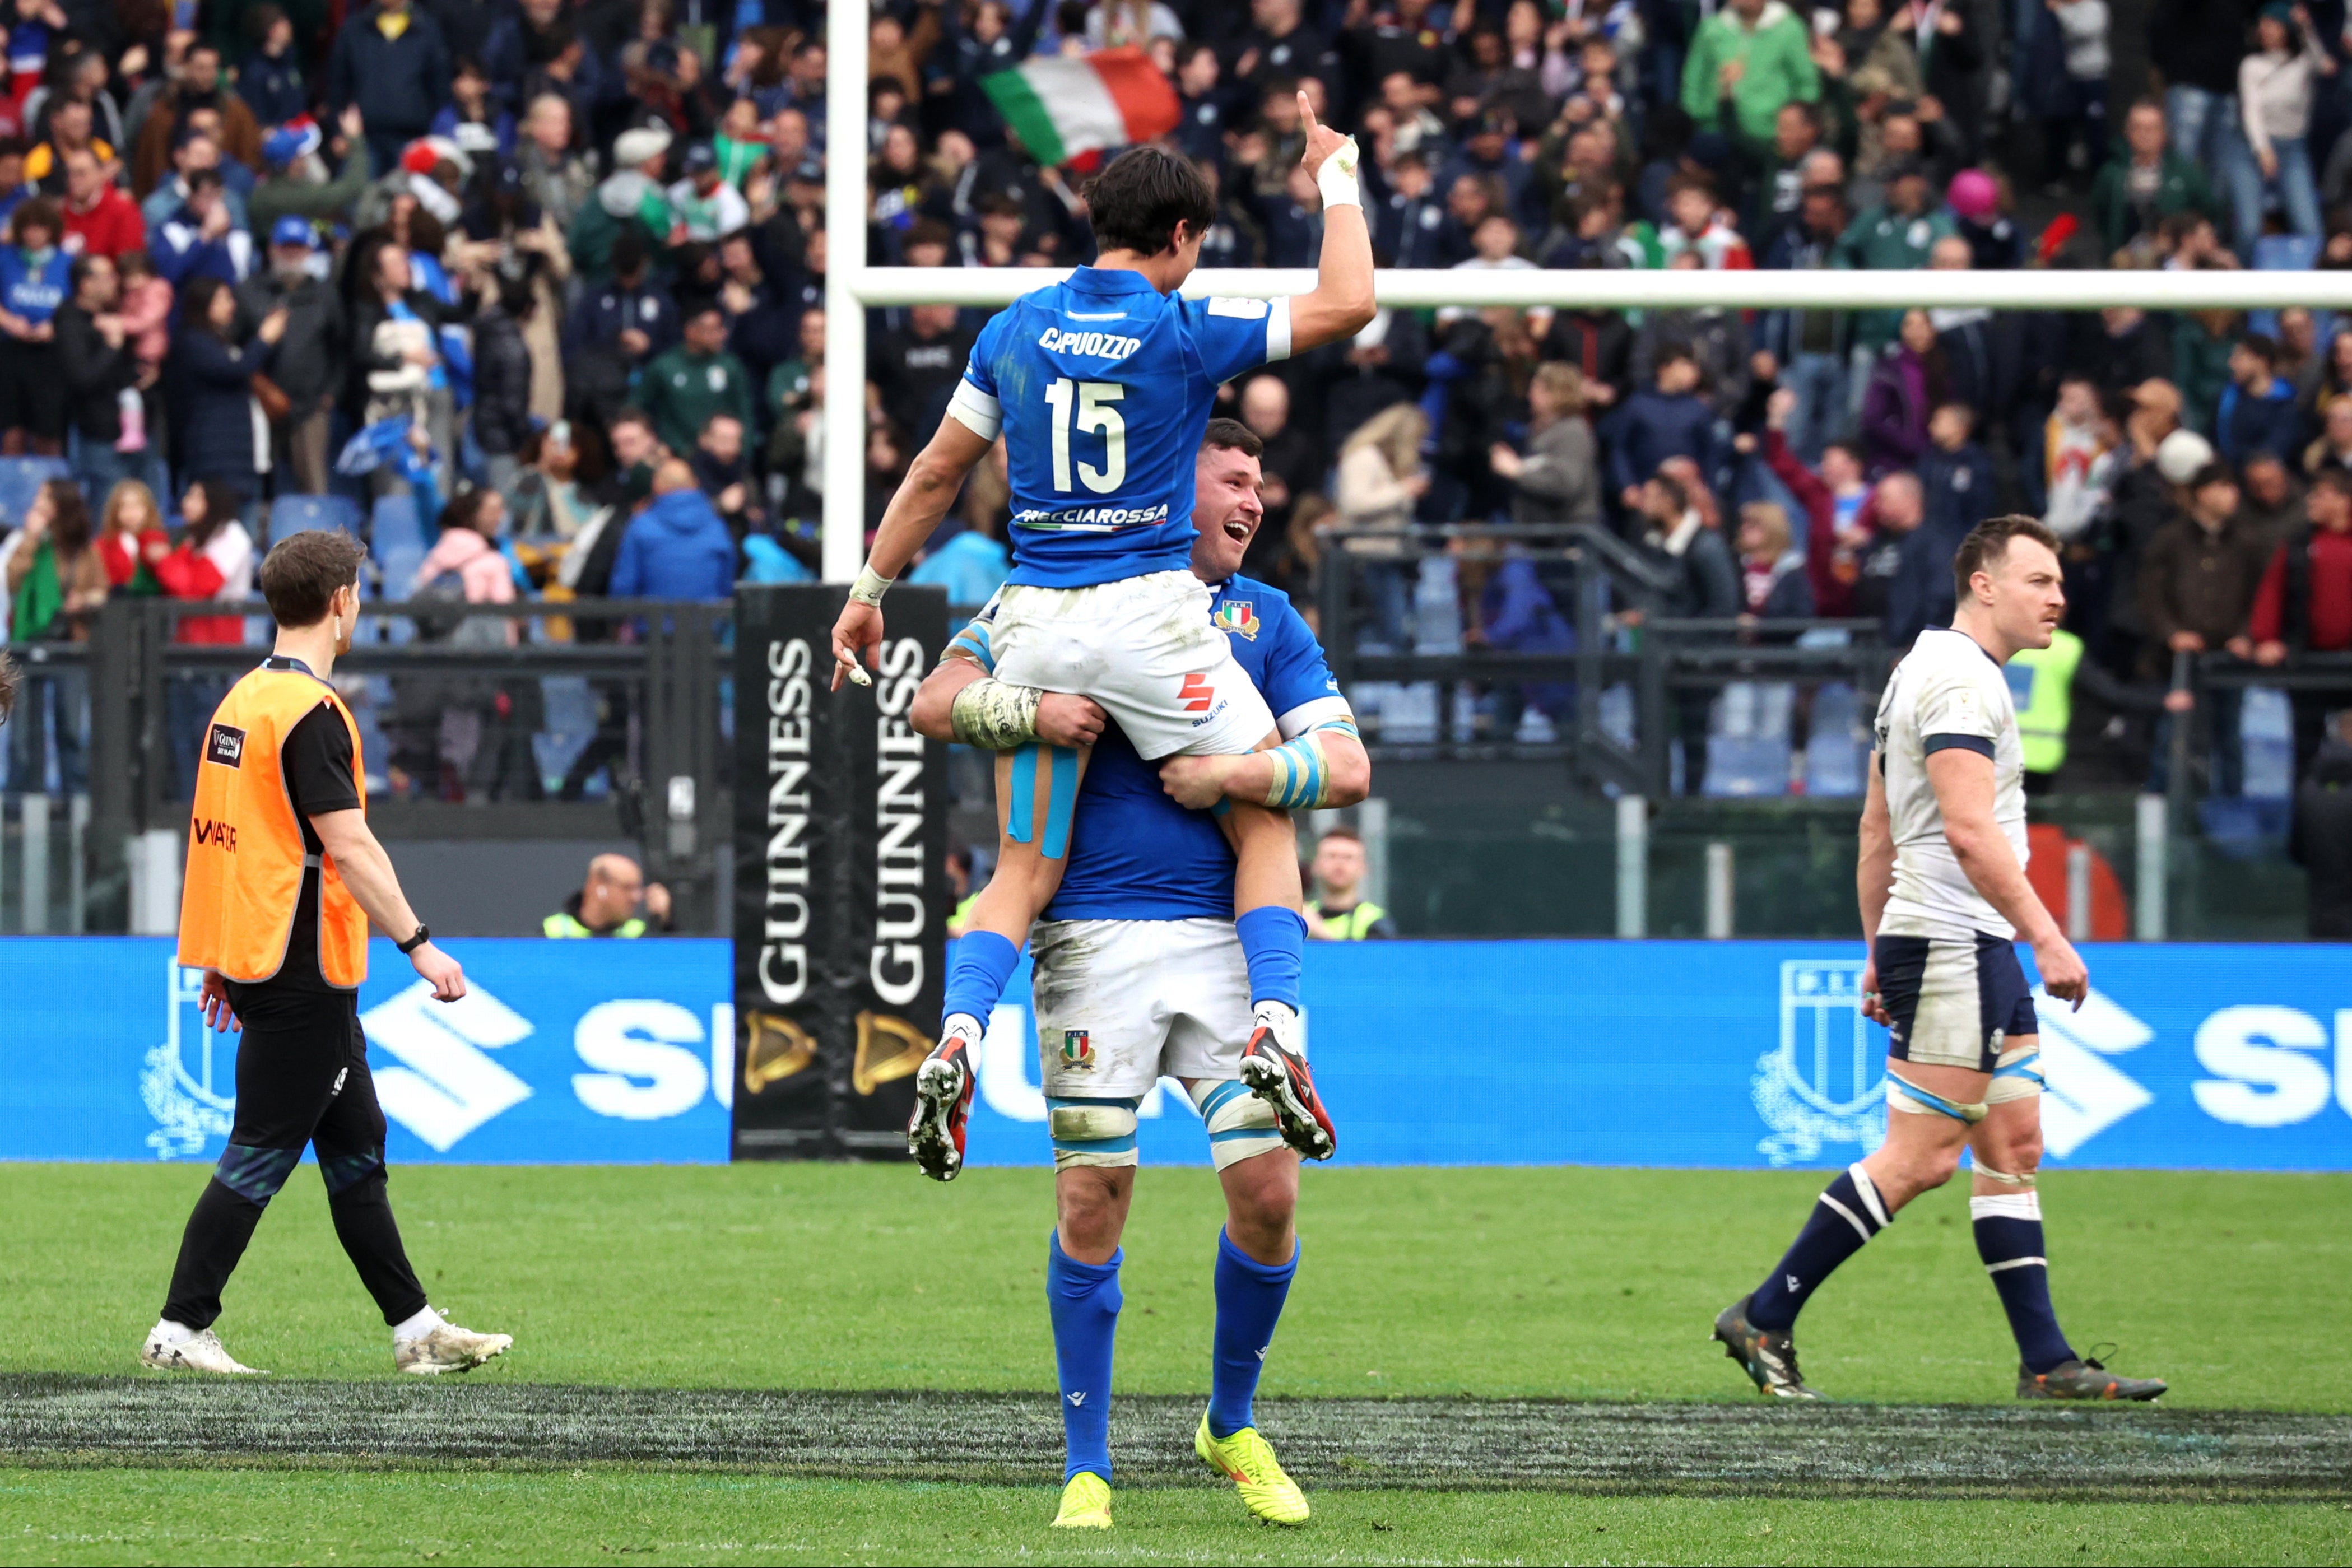 Italy stunned Scotland in Rome last weekend